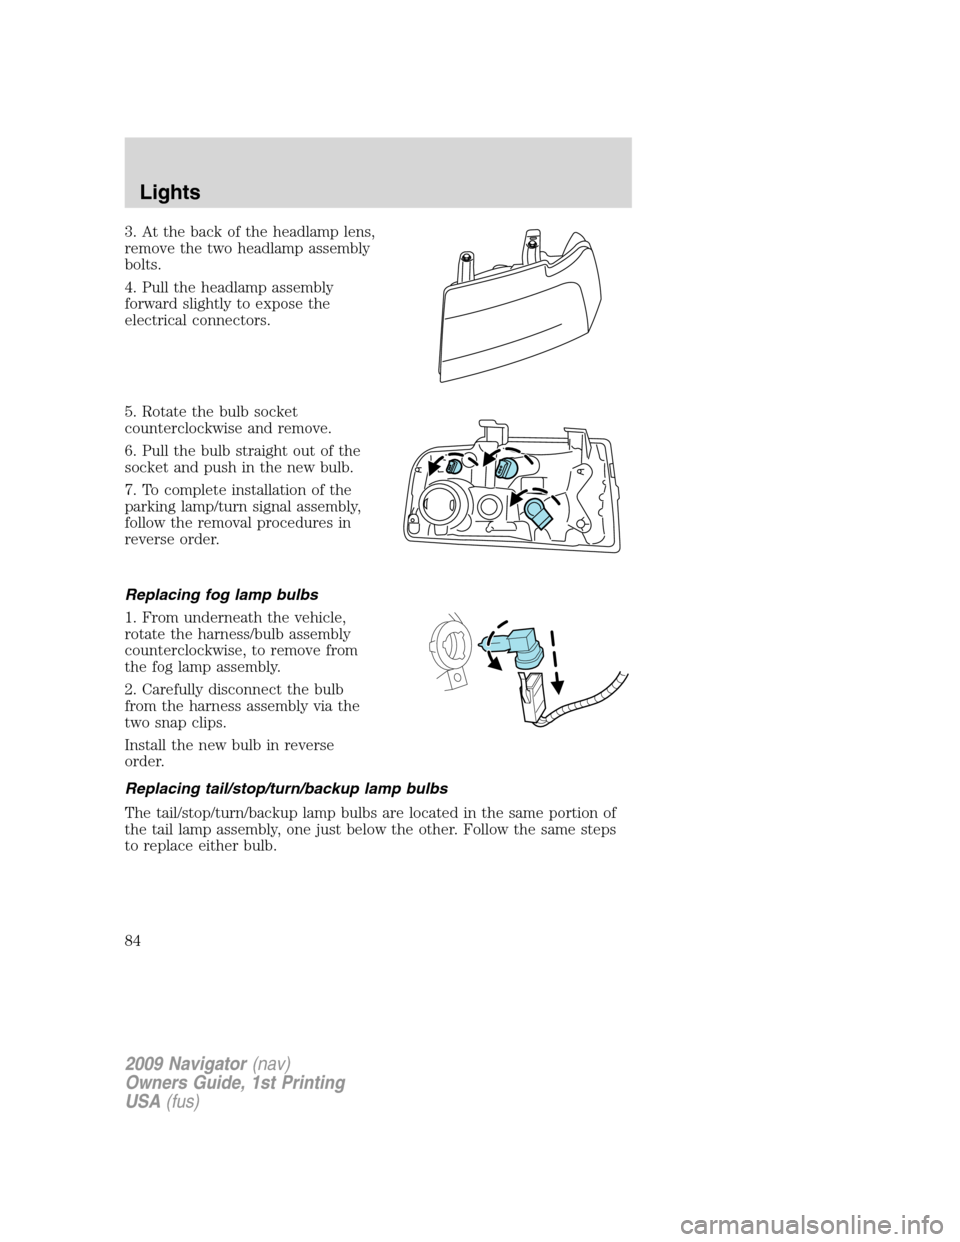 LINCOLN NAVIGATOR 2009  Owners Manual 3. At the back of the headlamp lens,
remove the two headlamp assembly
bolts.
4. Pull the headlamp assembly
forward slightly to expose the
electrical connectors.
5. Rotate the bulb socket
counterclockw